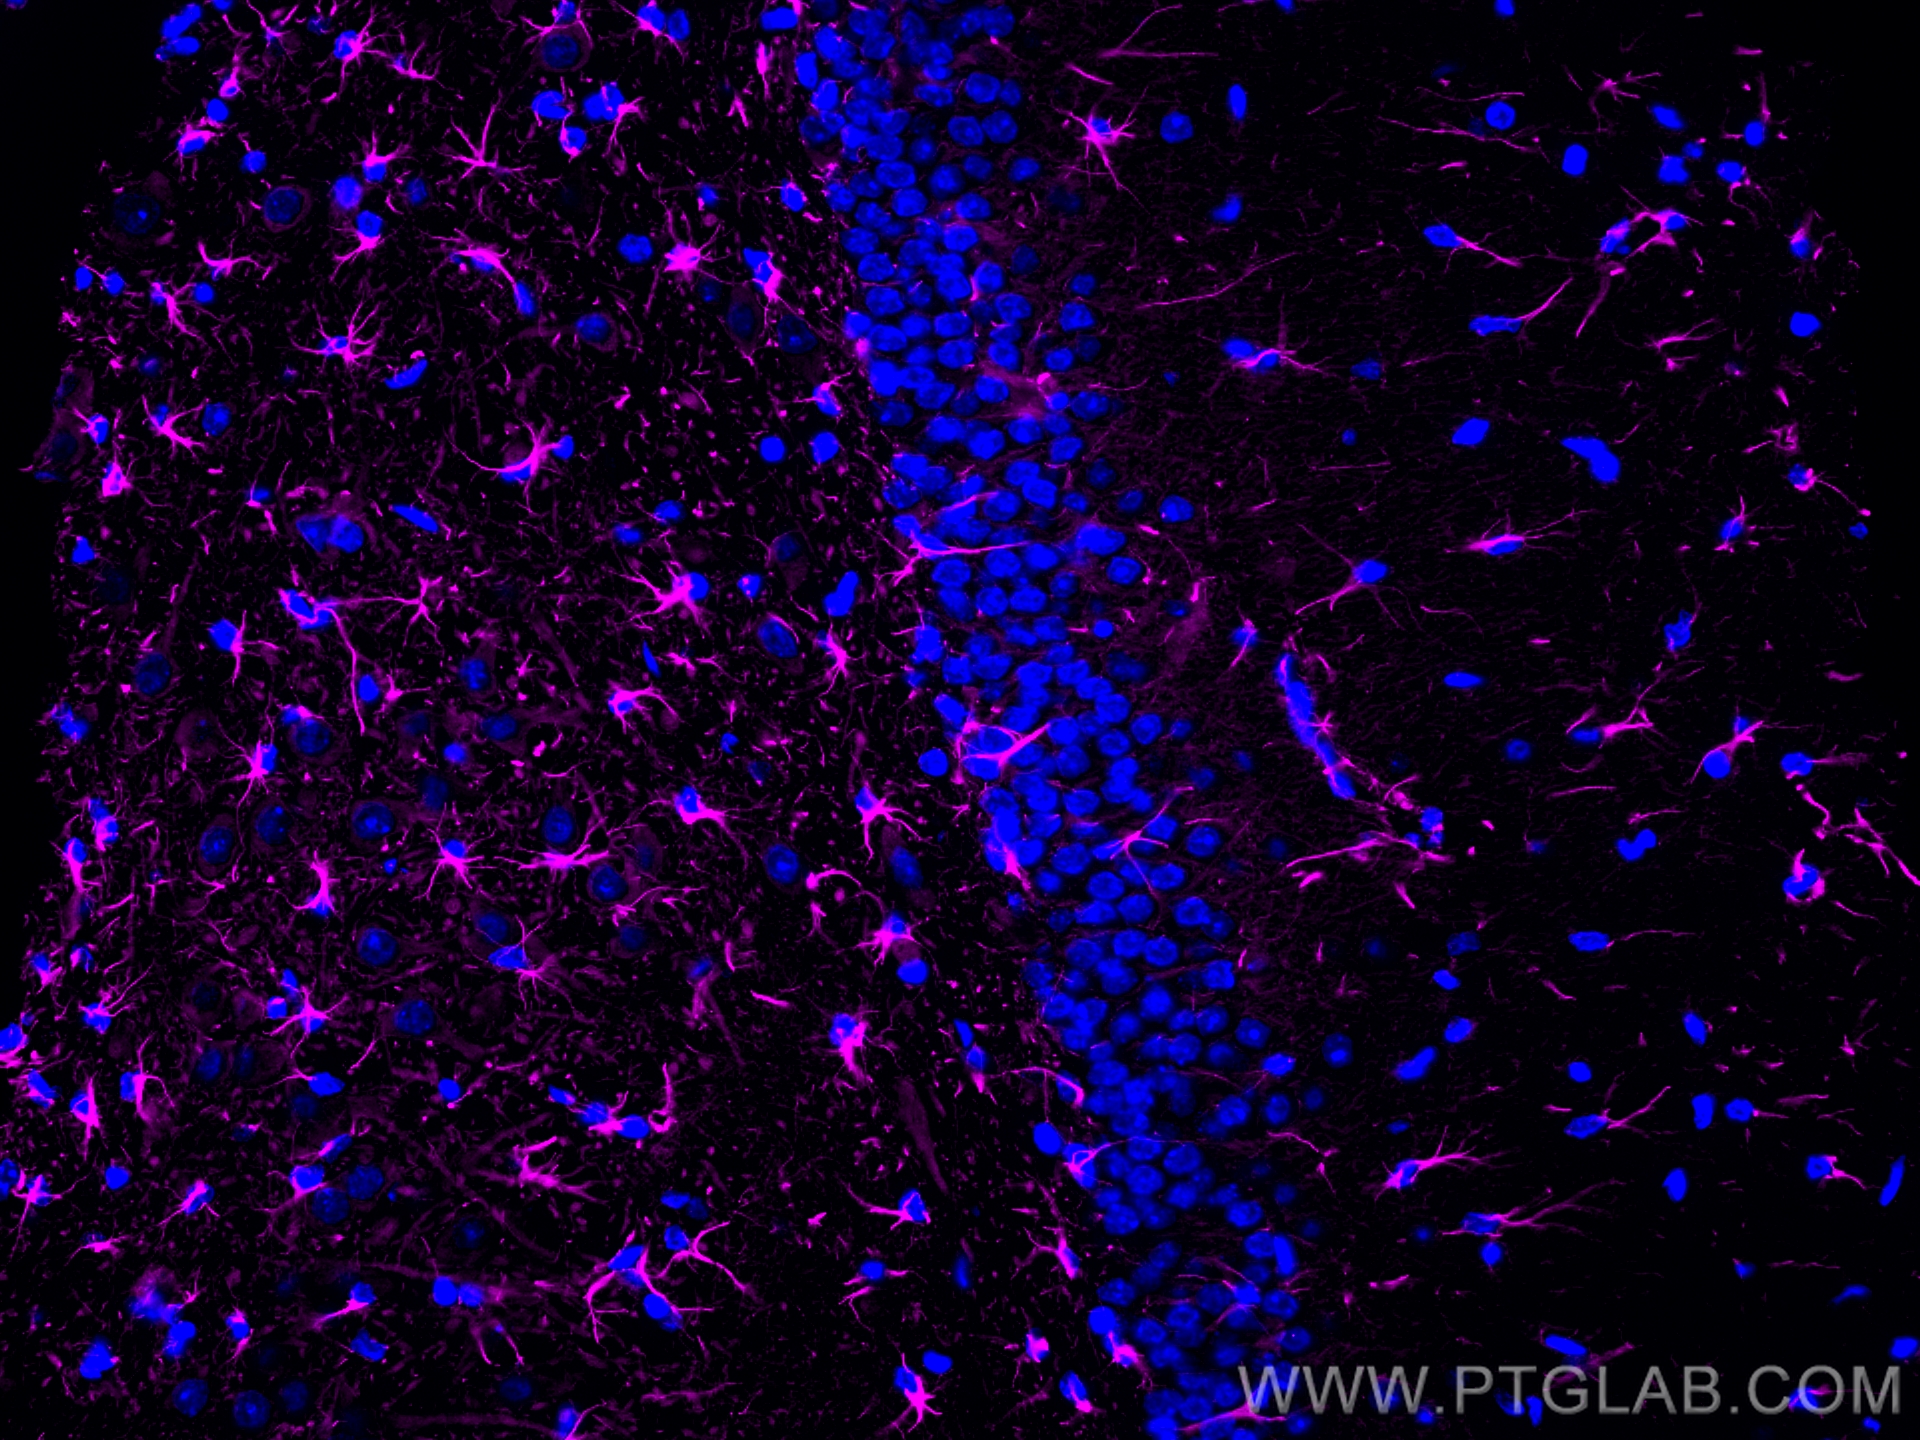 Immunofluorescence of rat brain: FFPE rat brain sections were stained with anti-GFAP antibody (60190-1-Ig) labeled with FlexAble Biotin Antibody Labeling Kit for Mouse IgG2a (KFA047) and Streptavidin-650 (magenta).  Cell nuclei are in blue.